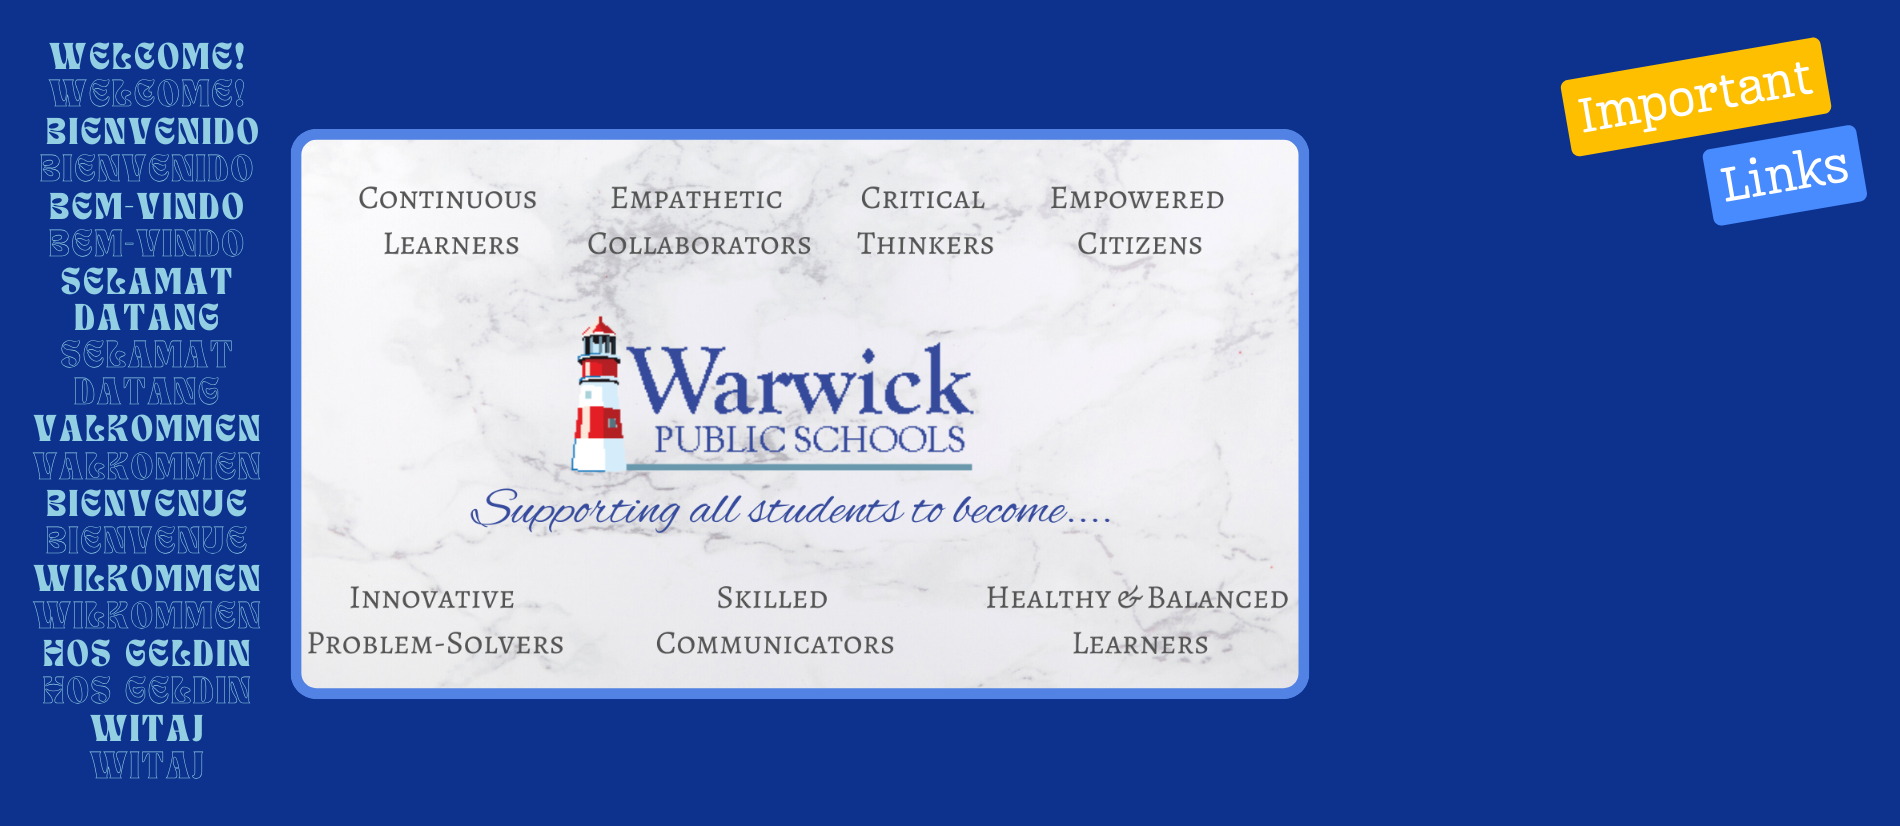 Warwick public schools, supporting all students to become Continuous learners, Empowered citizens, Empathetic collaborators, Skilled communicators, Innovative problem-solvers, Critical thinkers, Healthy and balanced learners